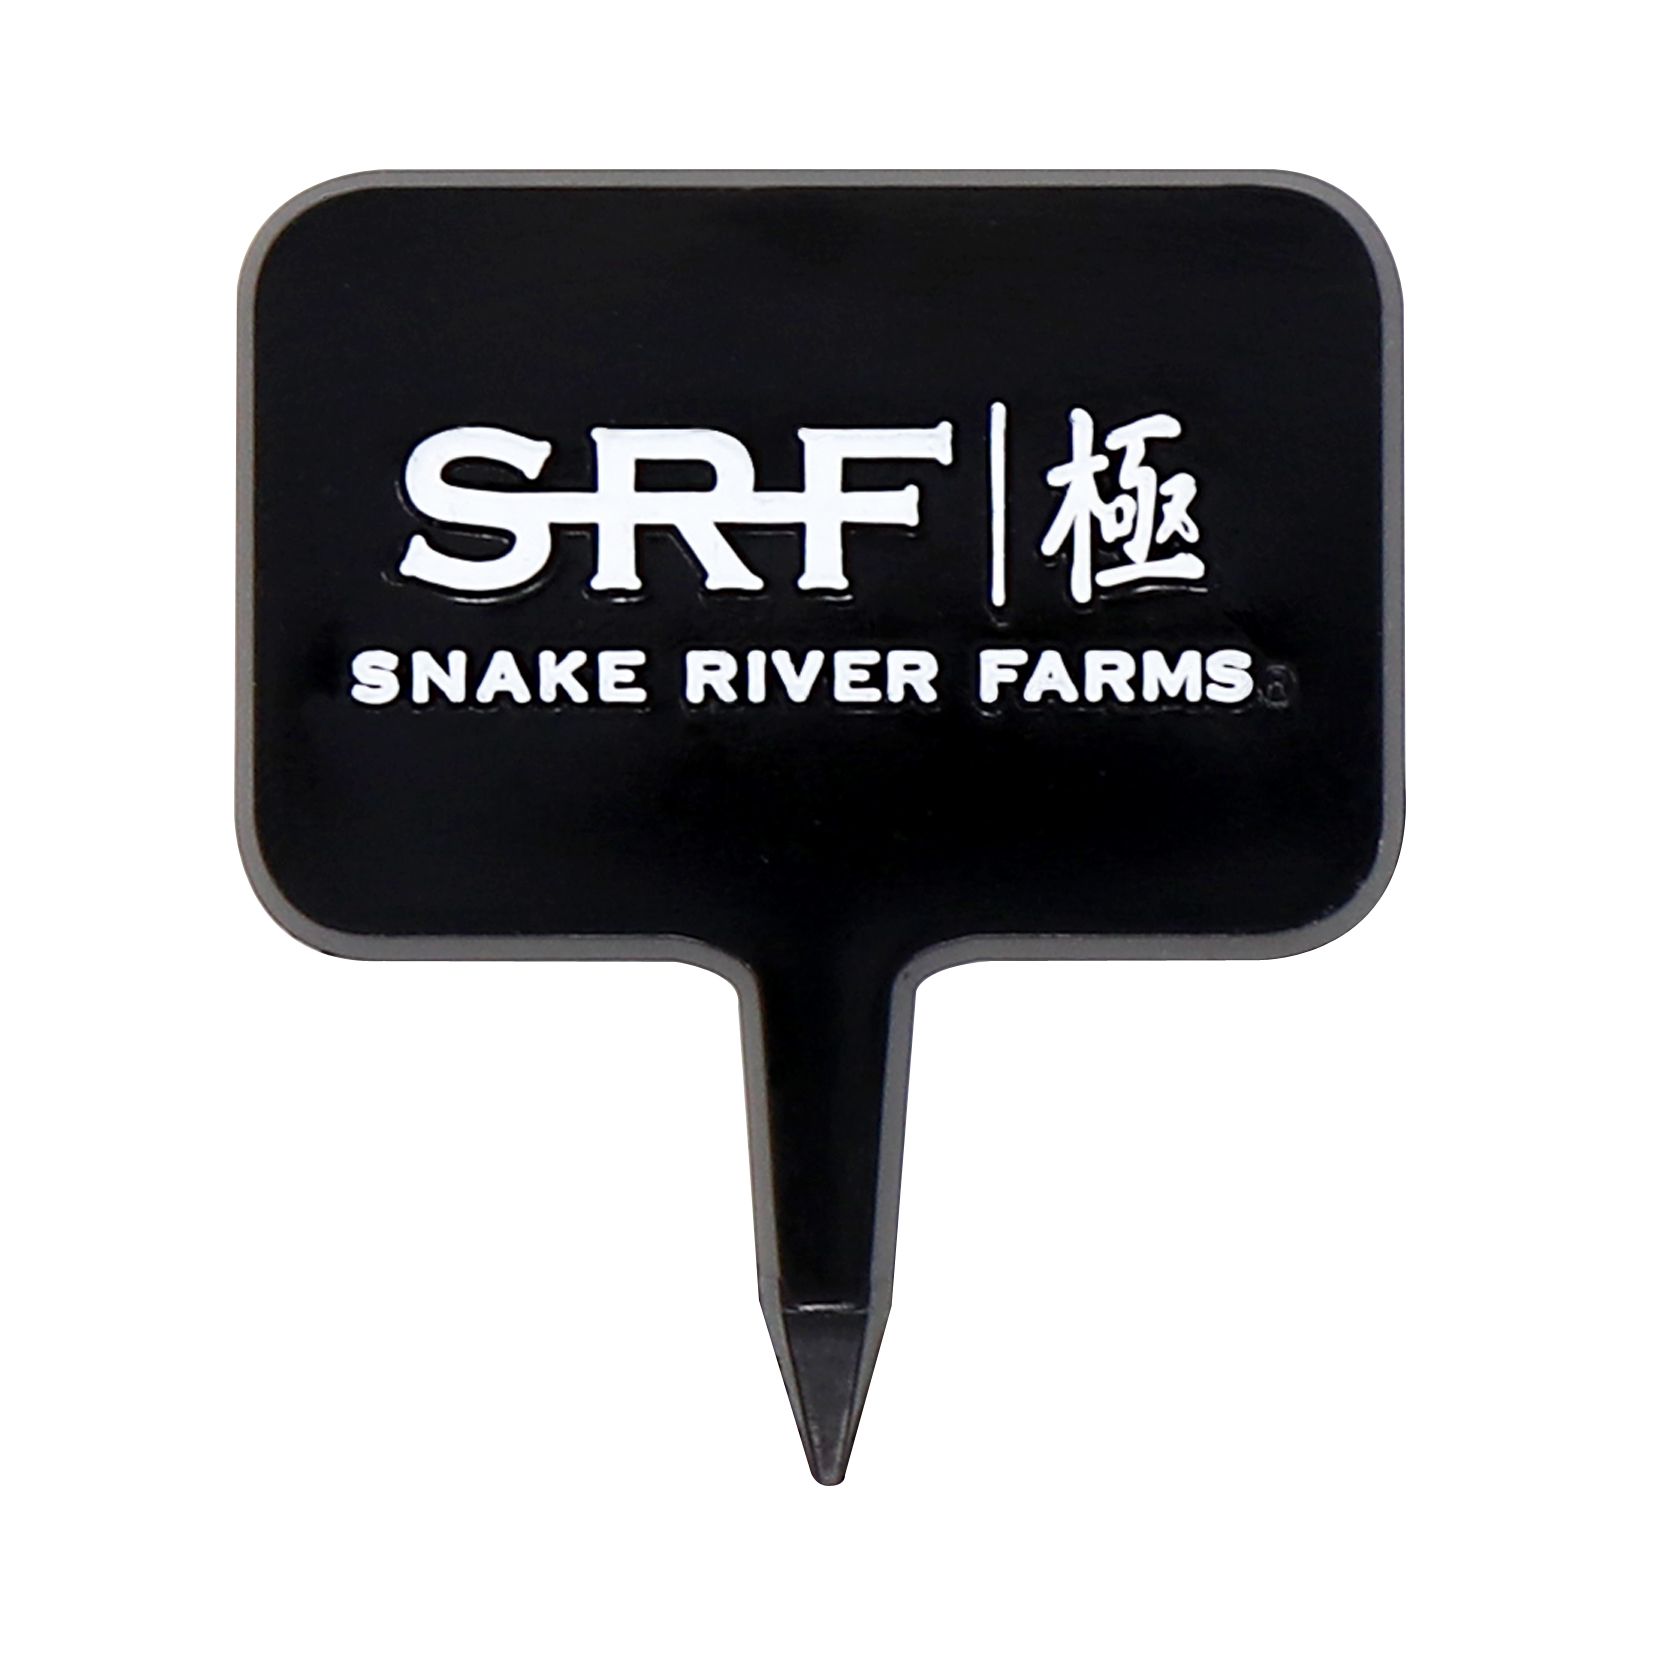 Black Rectangle Head Short Pick with words "SRF - Snack River Farms"